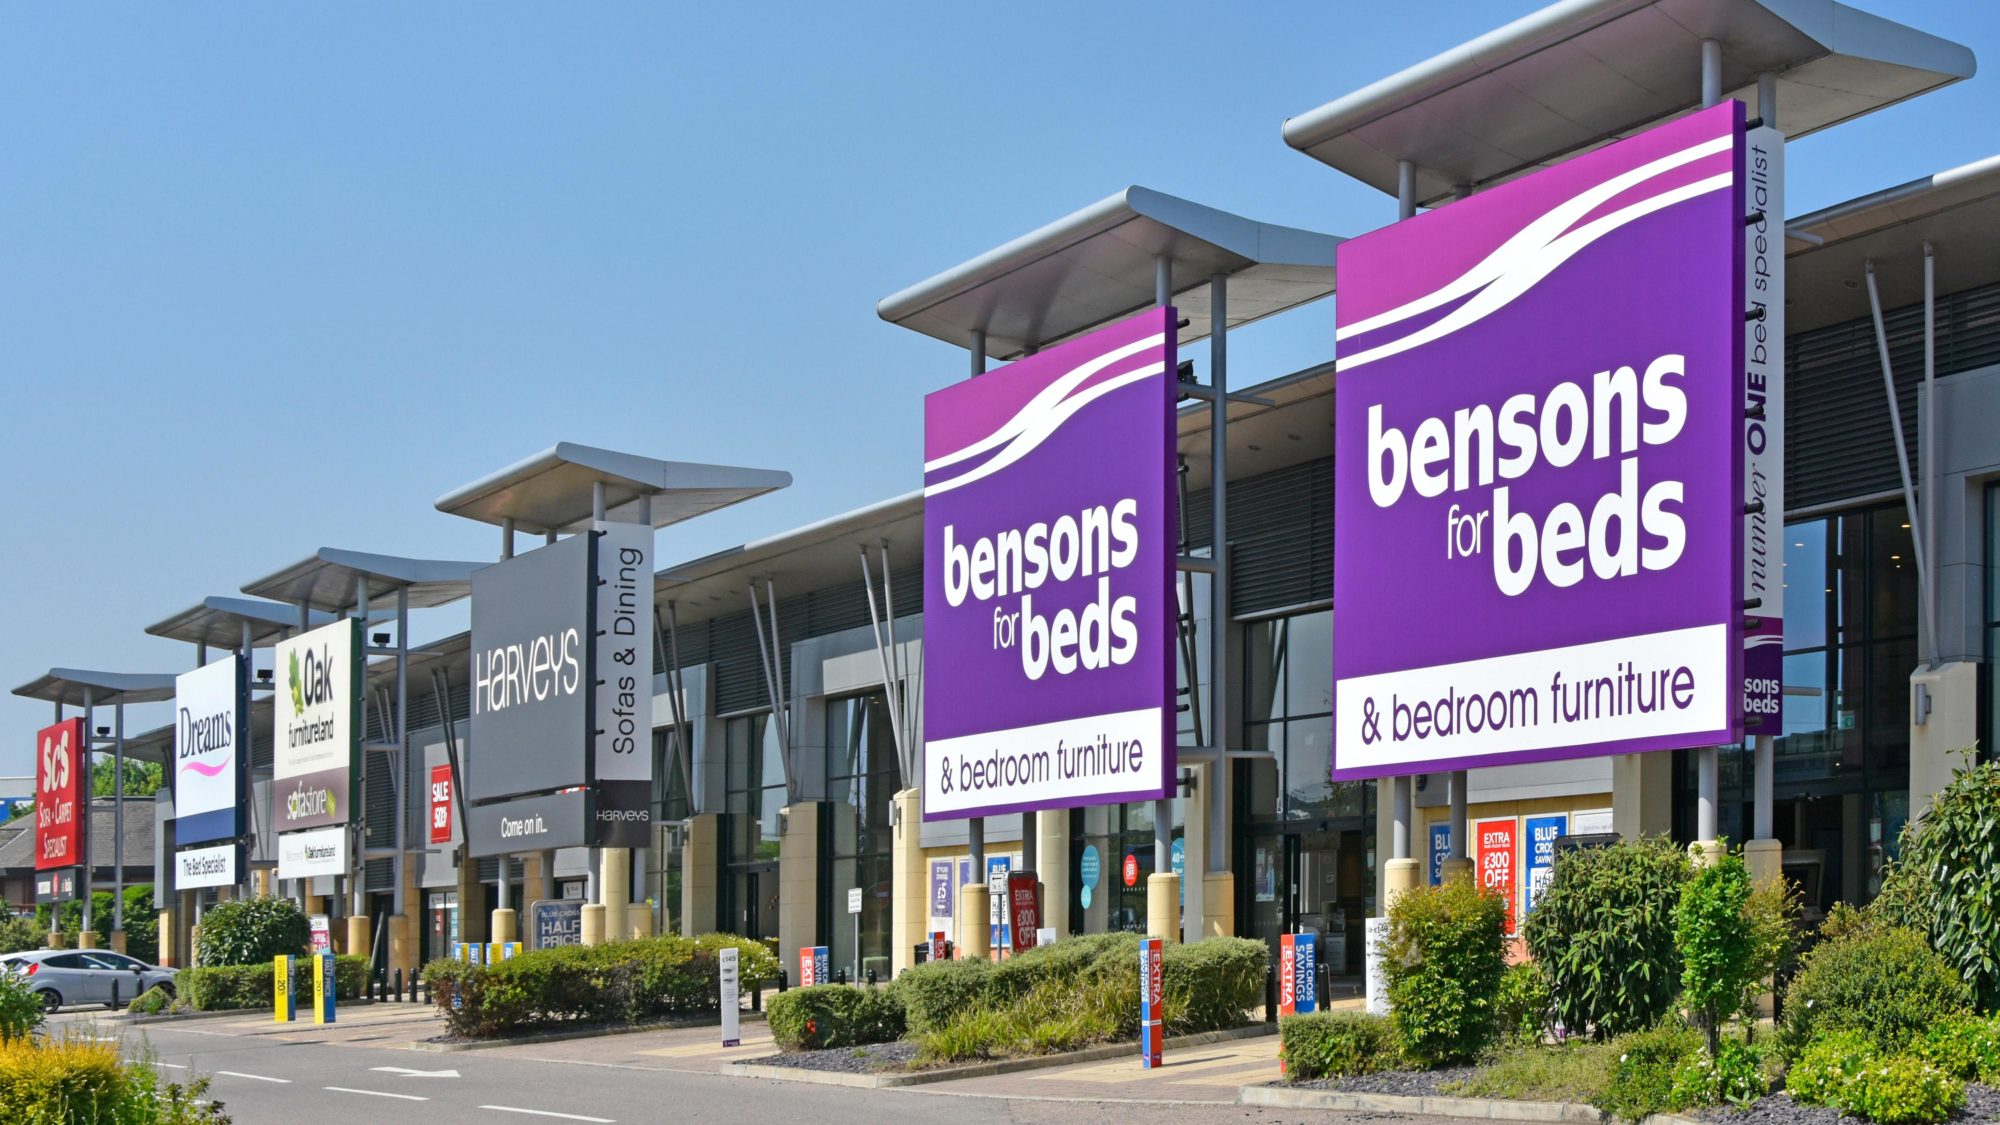 New CEO & board appointments at Bensons for Beds